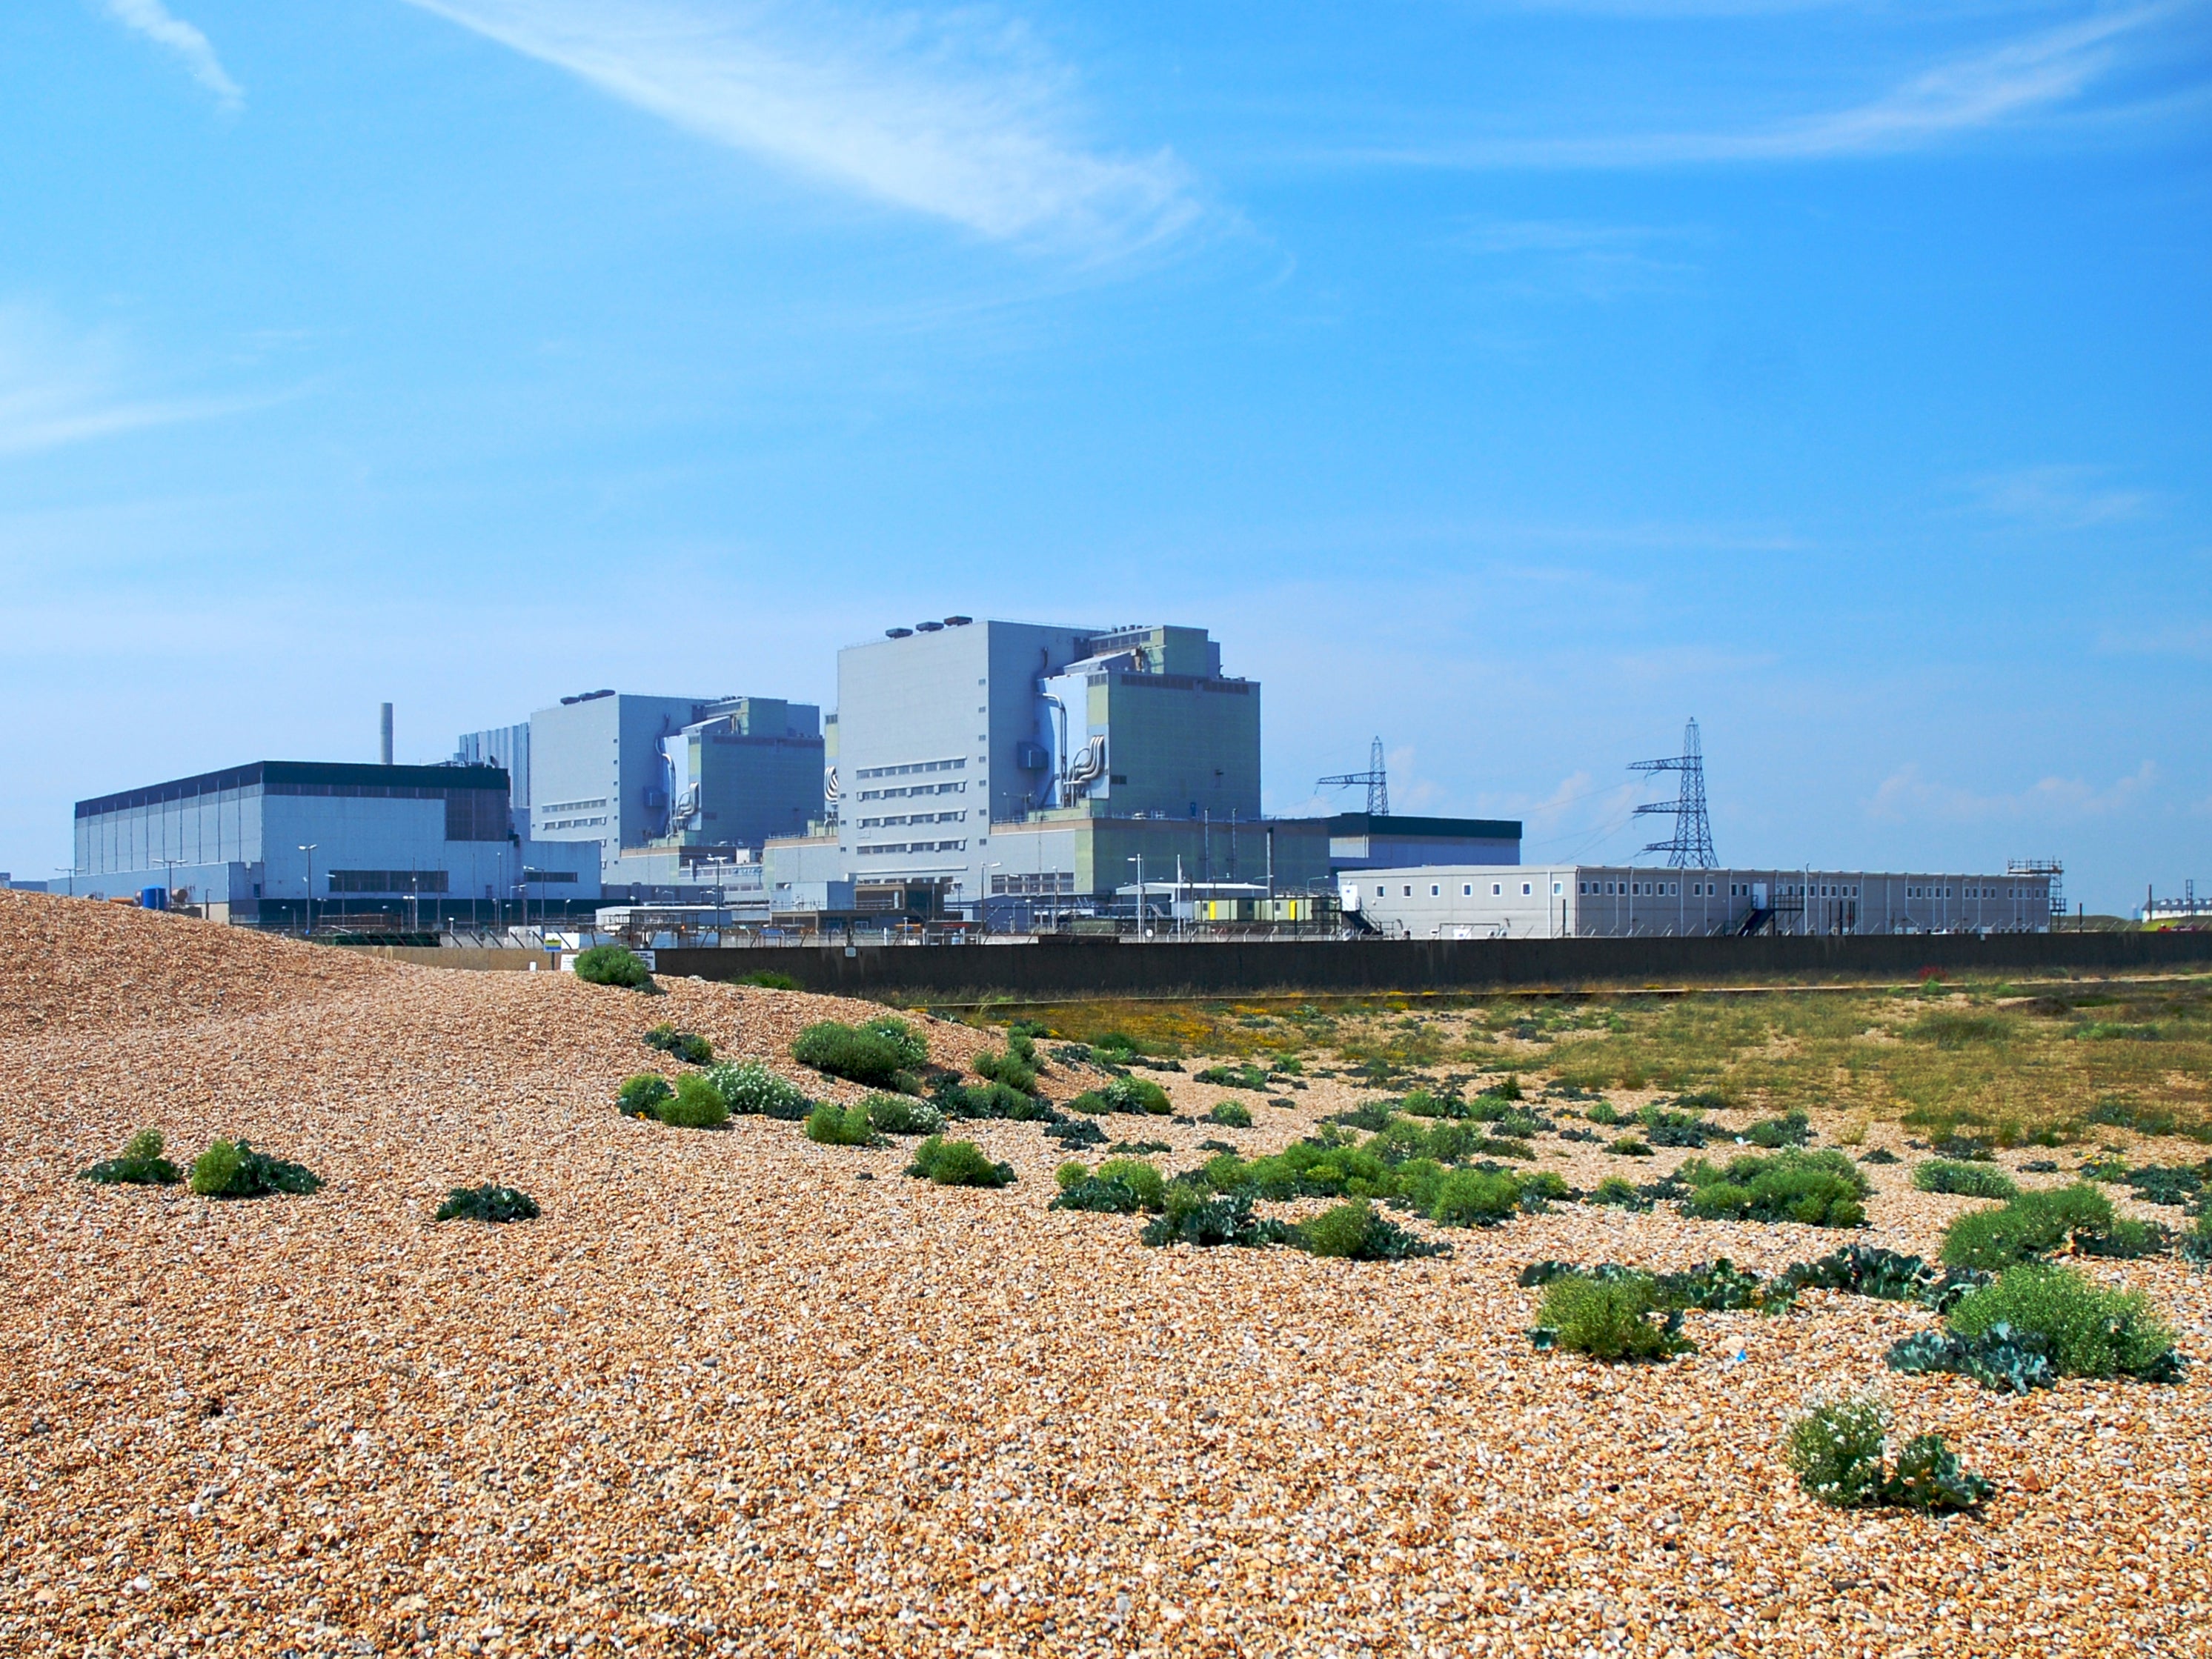 The nuclear power station at Dungeness on the south east coast of England